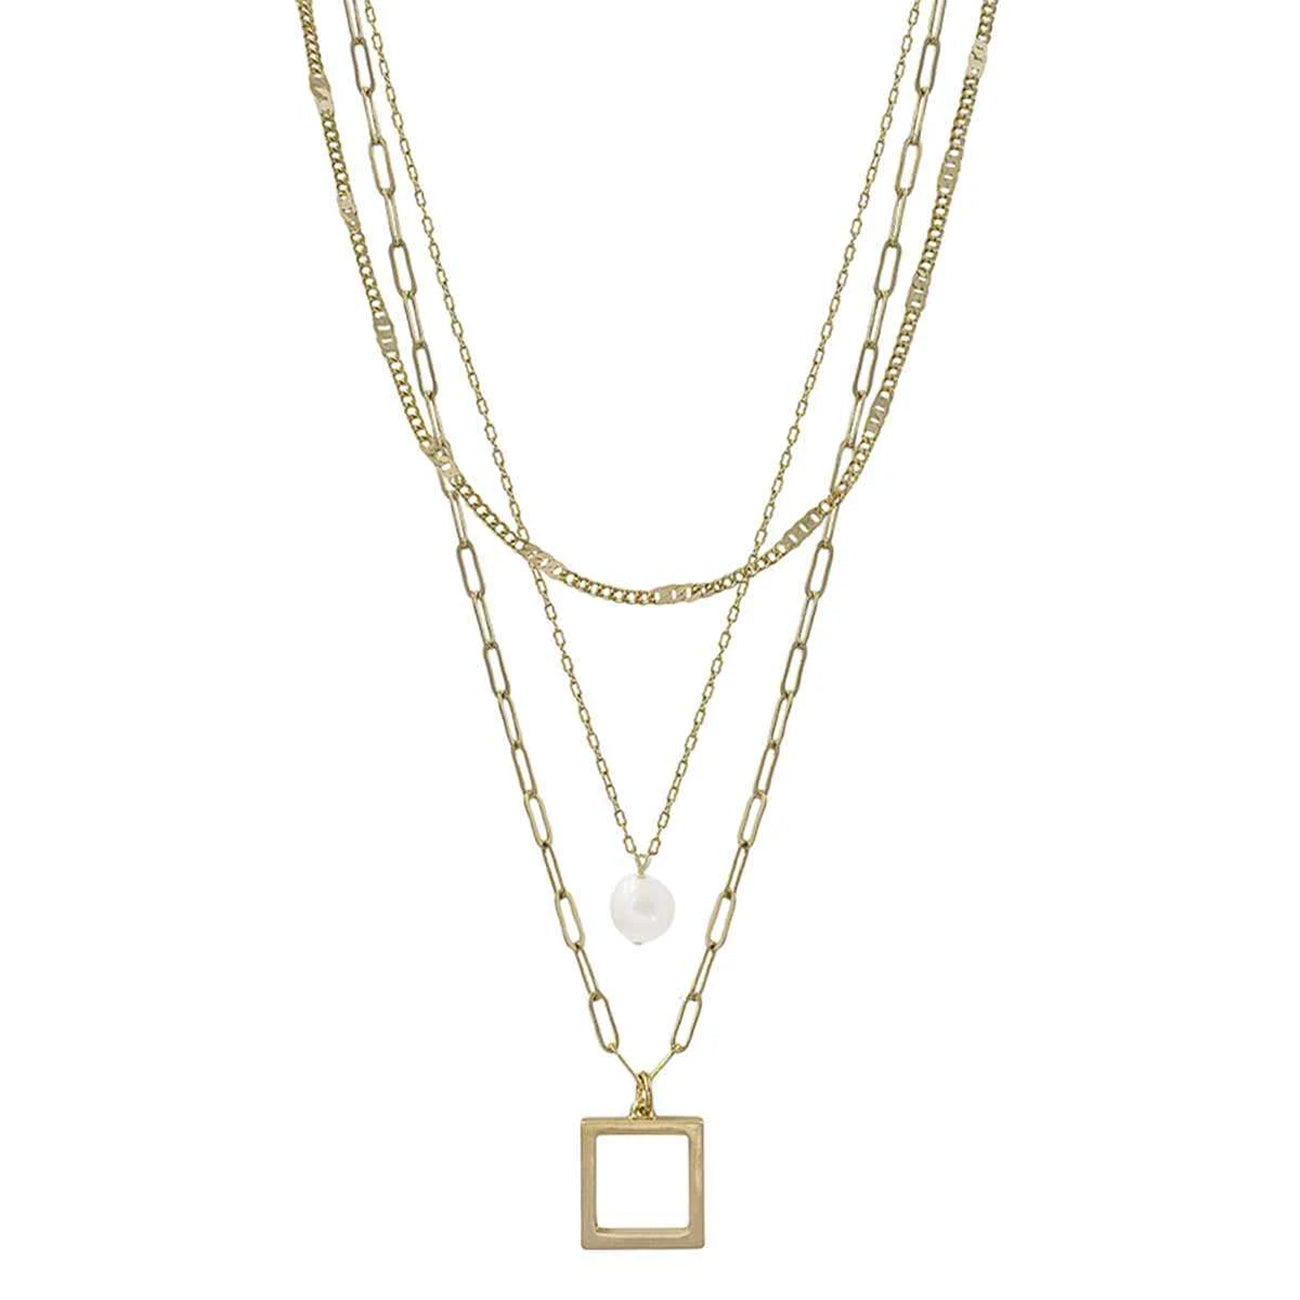 Gold 3 Layered Chain Pendant Necklace for Women